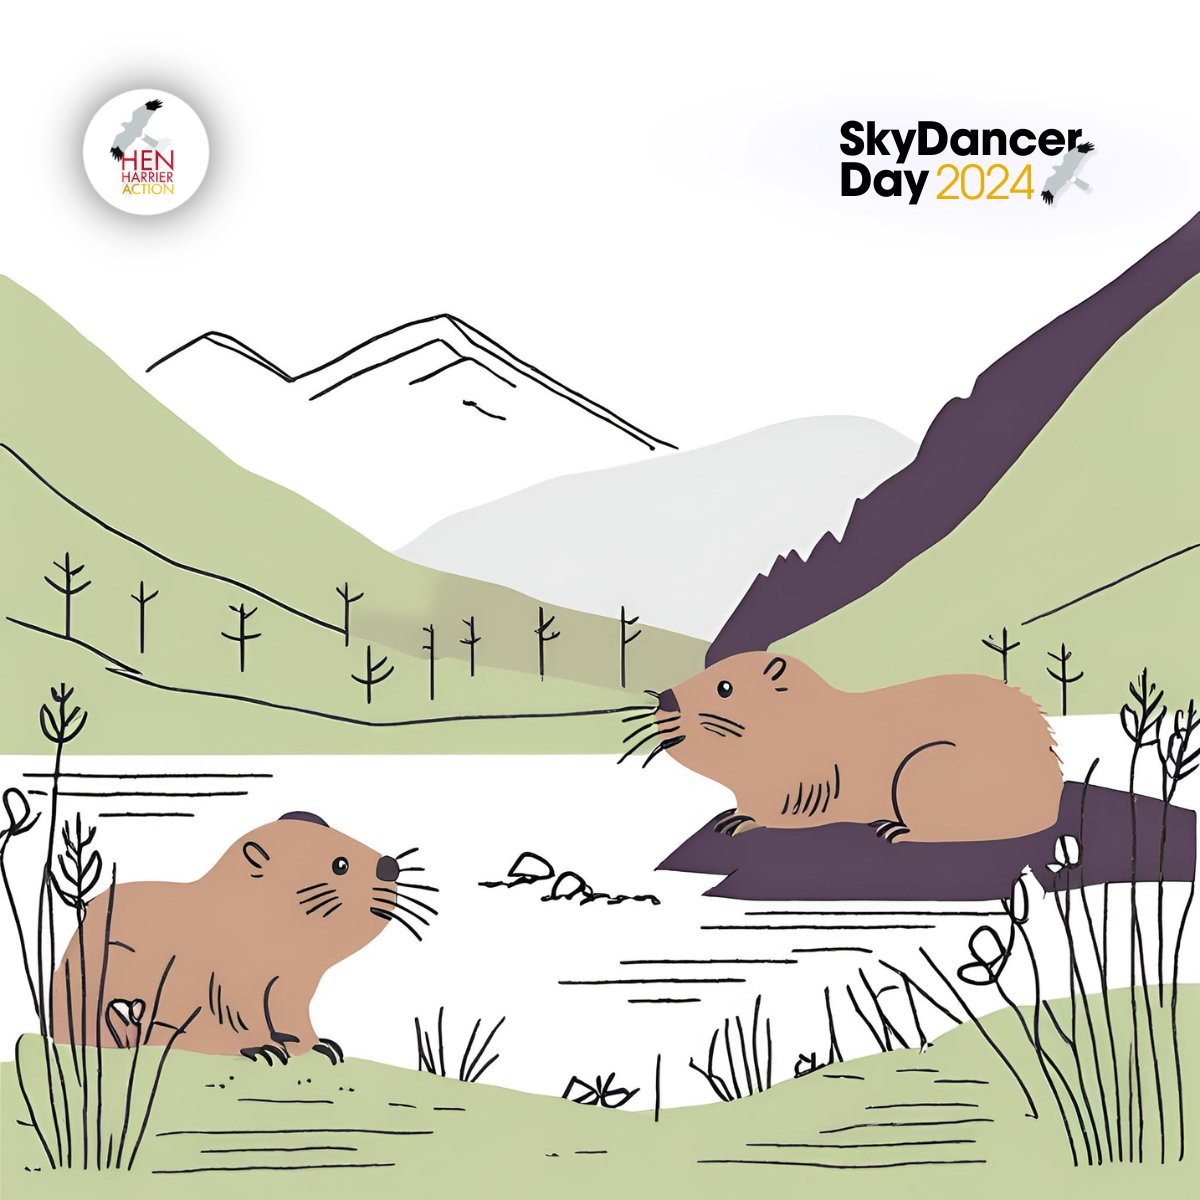 There was a great film on the @RSPBScotland Beaver reintroduction scheme at Insh Marshes, Cairngorms during #SkyDancerDay2024 last week.

📺Rewatch the film here: youtube.com/live/kNnVDdcYE…